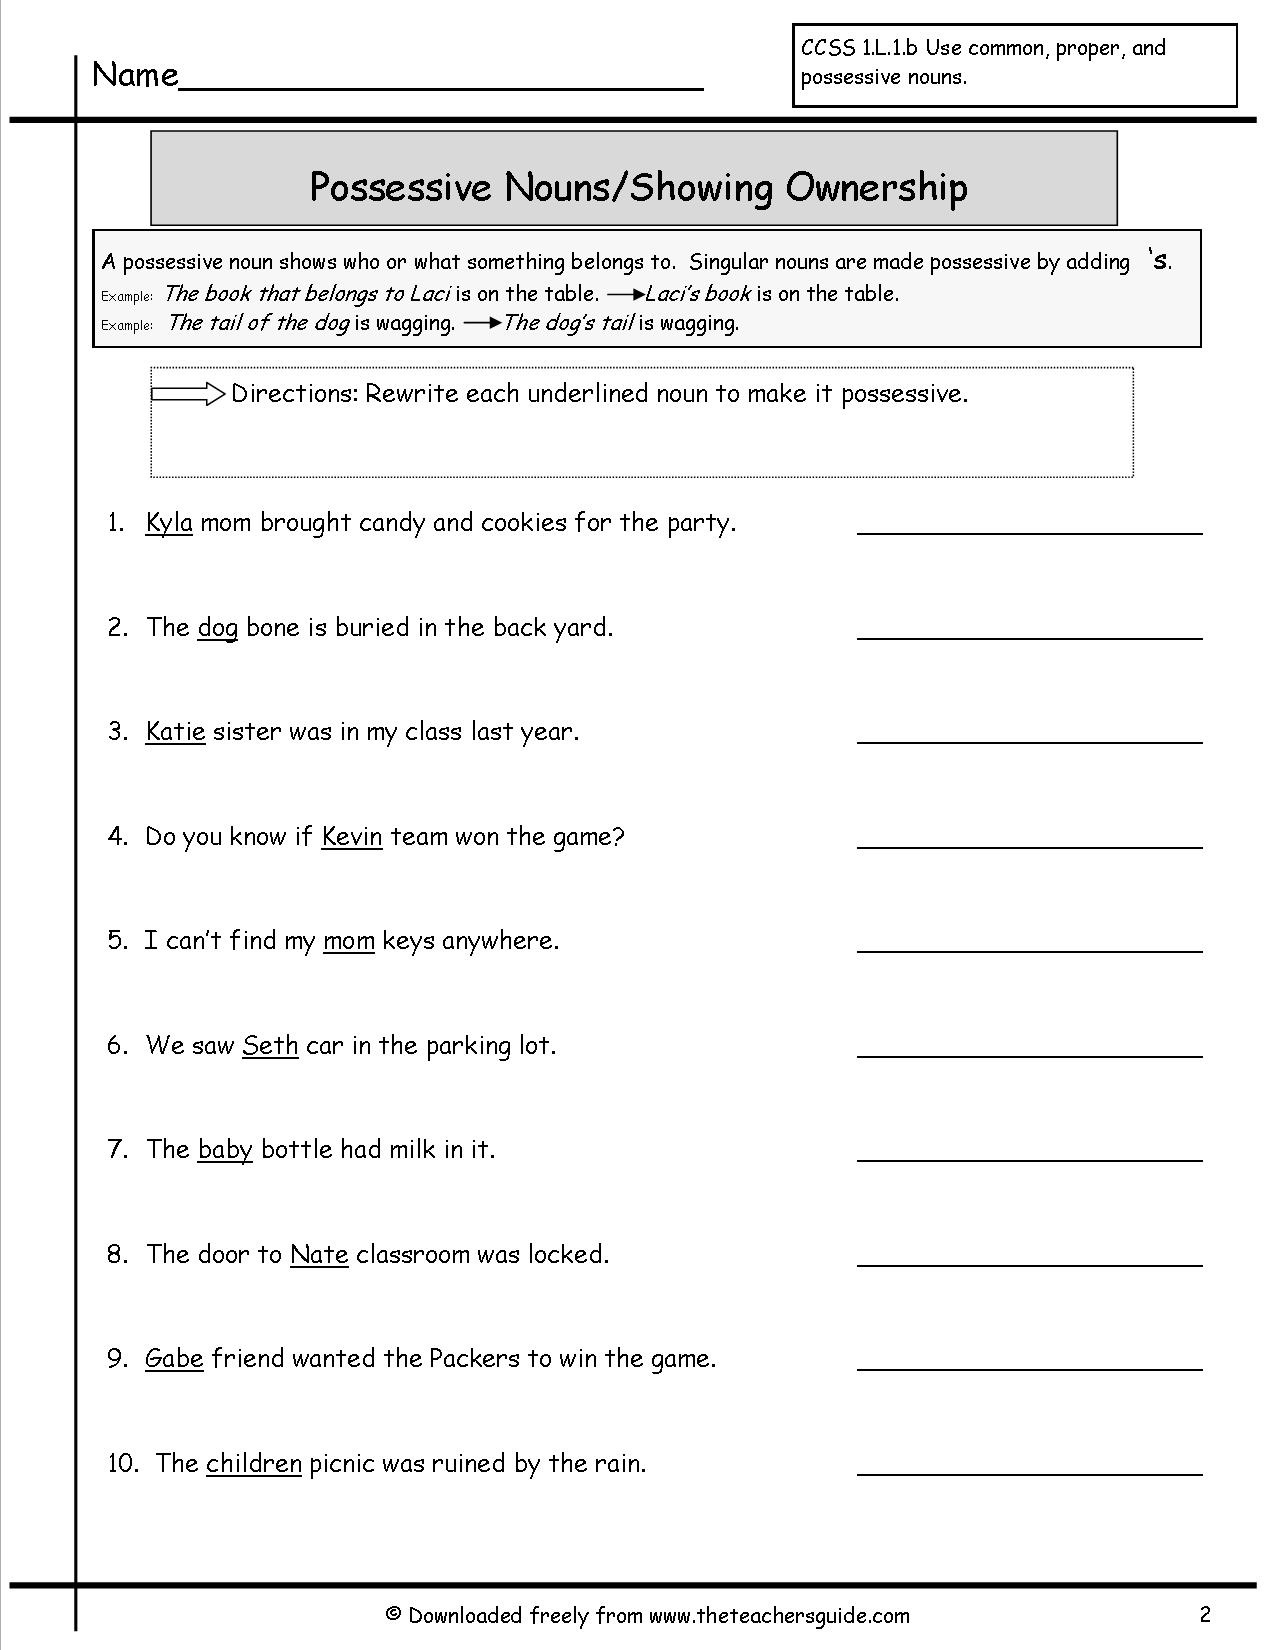 Free Printable Rules On Forming Possessives Grade 6 Printable Forms Free Online